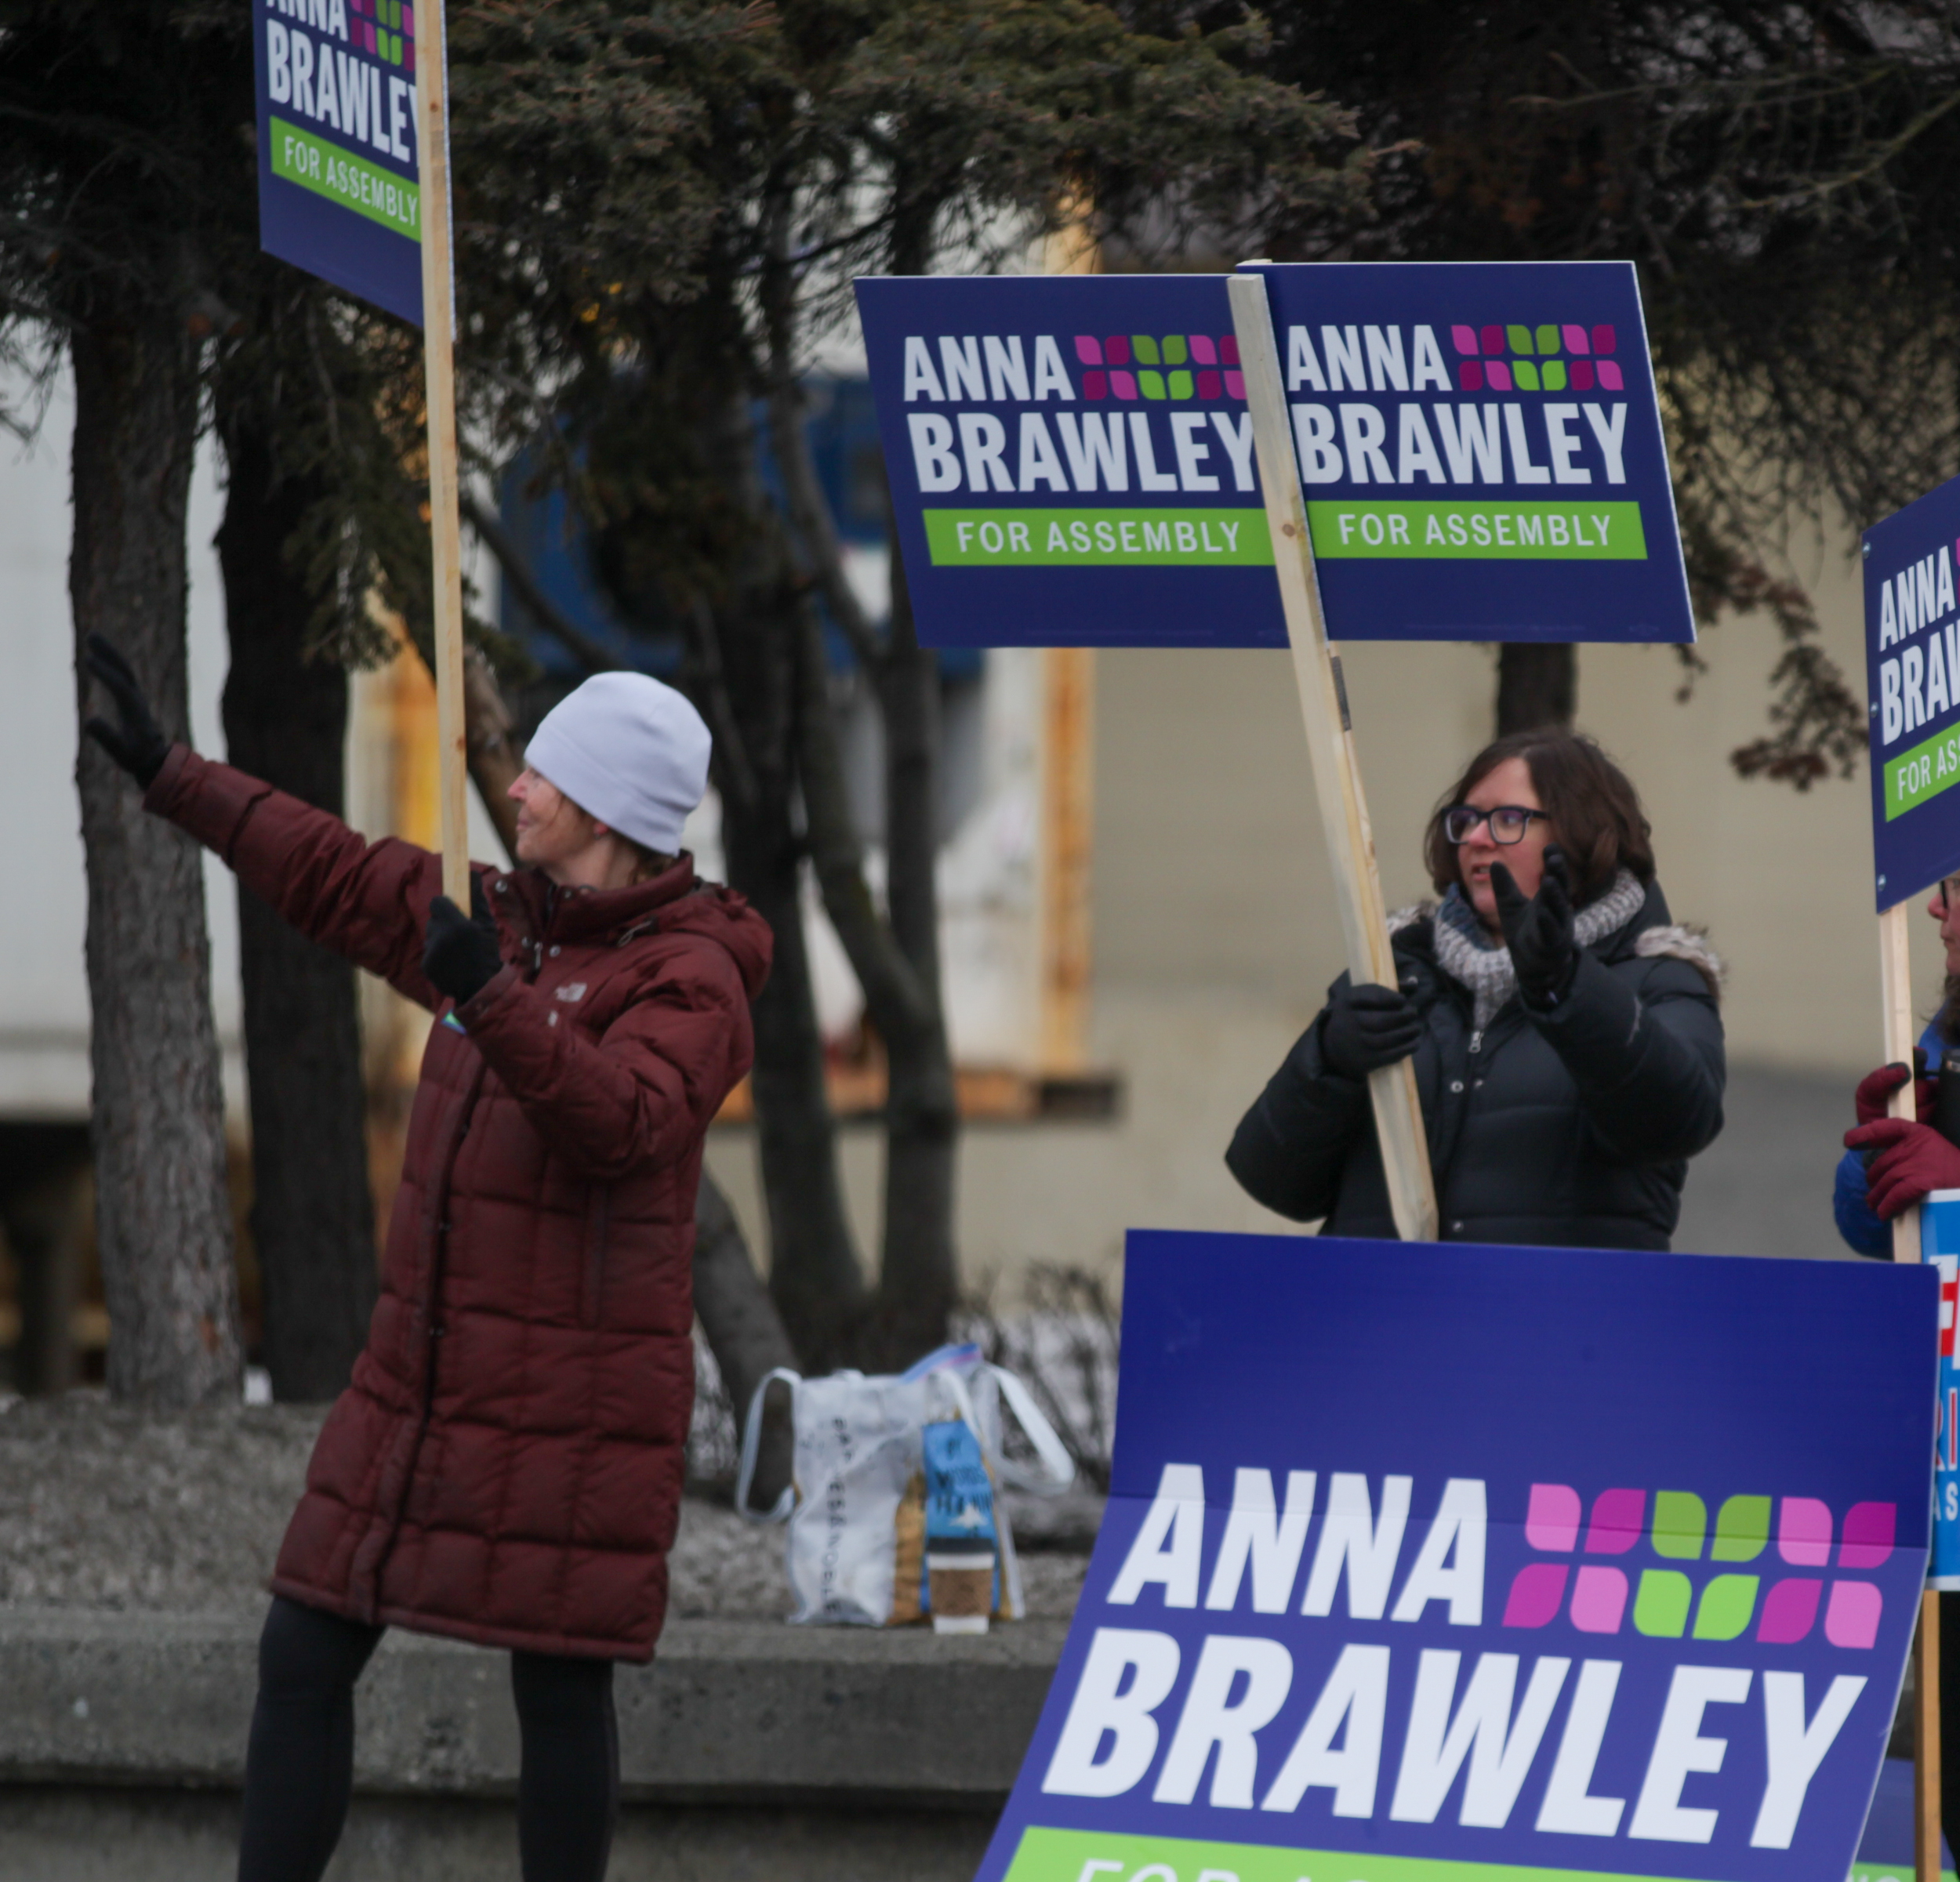 Women in winter coats wave political campaign signs at an intersection.